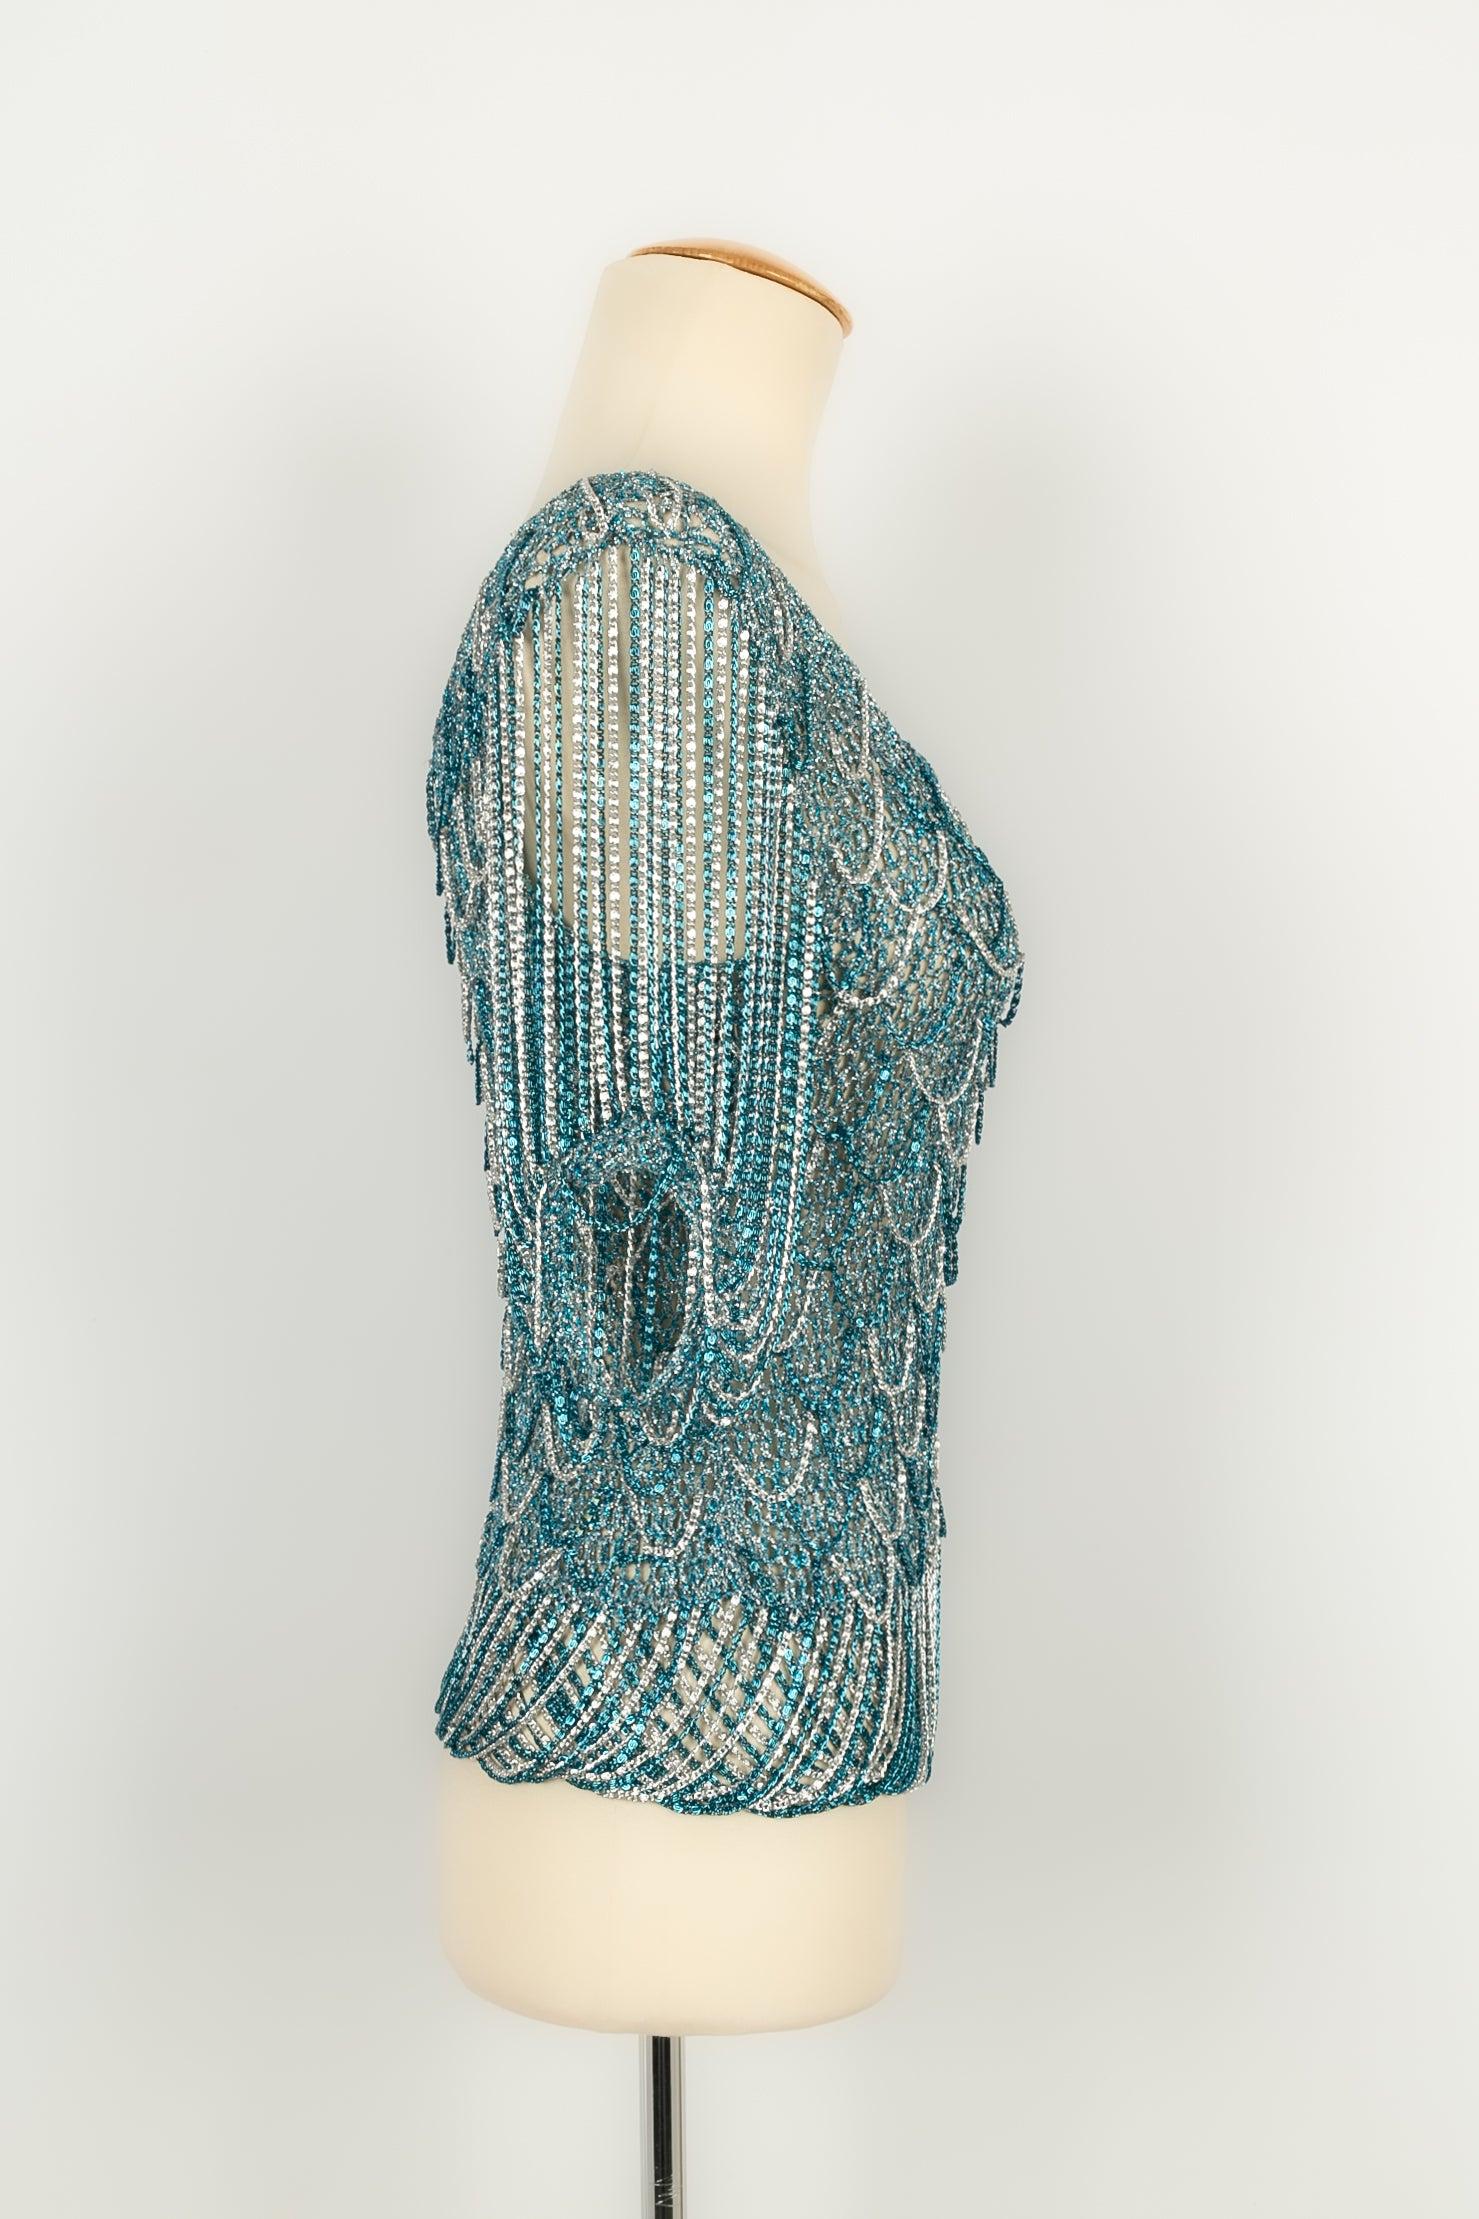 Women's Azzaro Mesh Top in Blue and Silver Lurex, 1970s For Sale